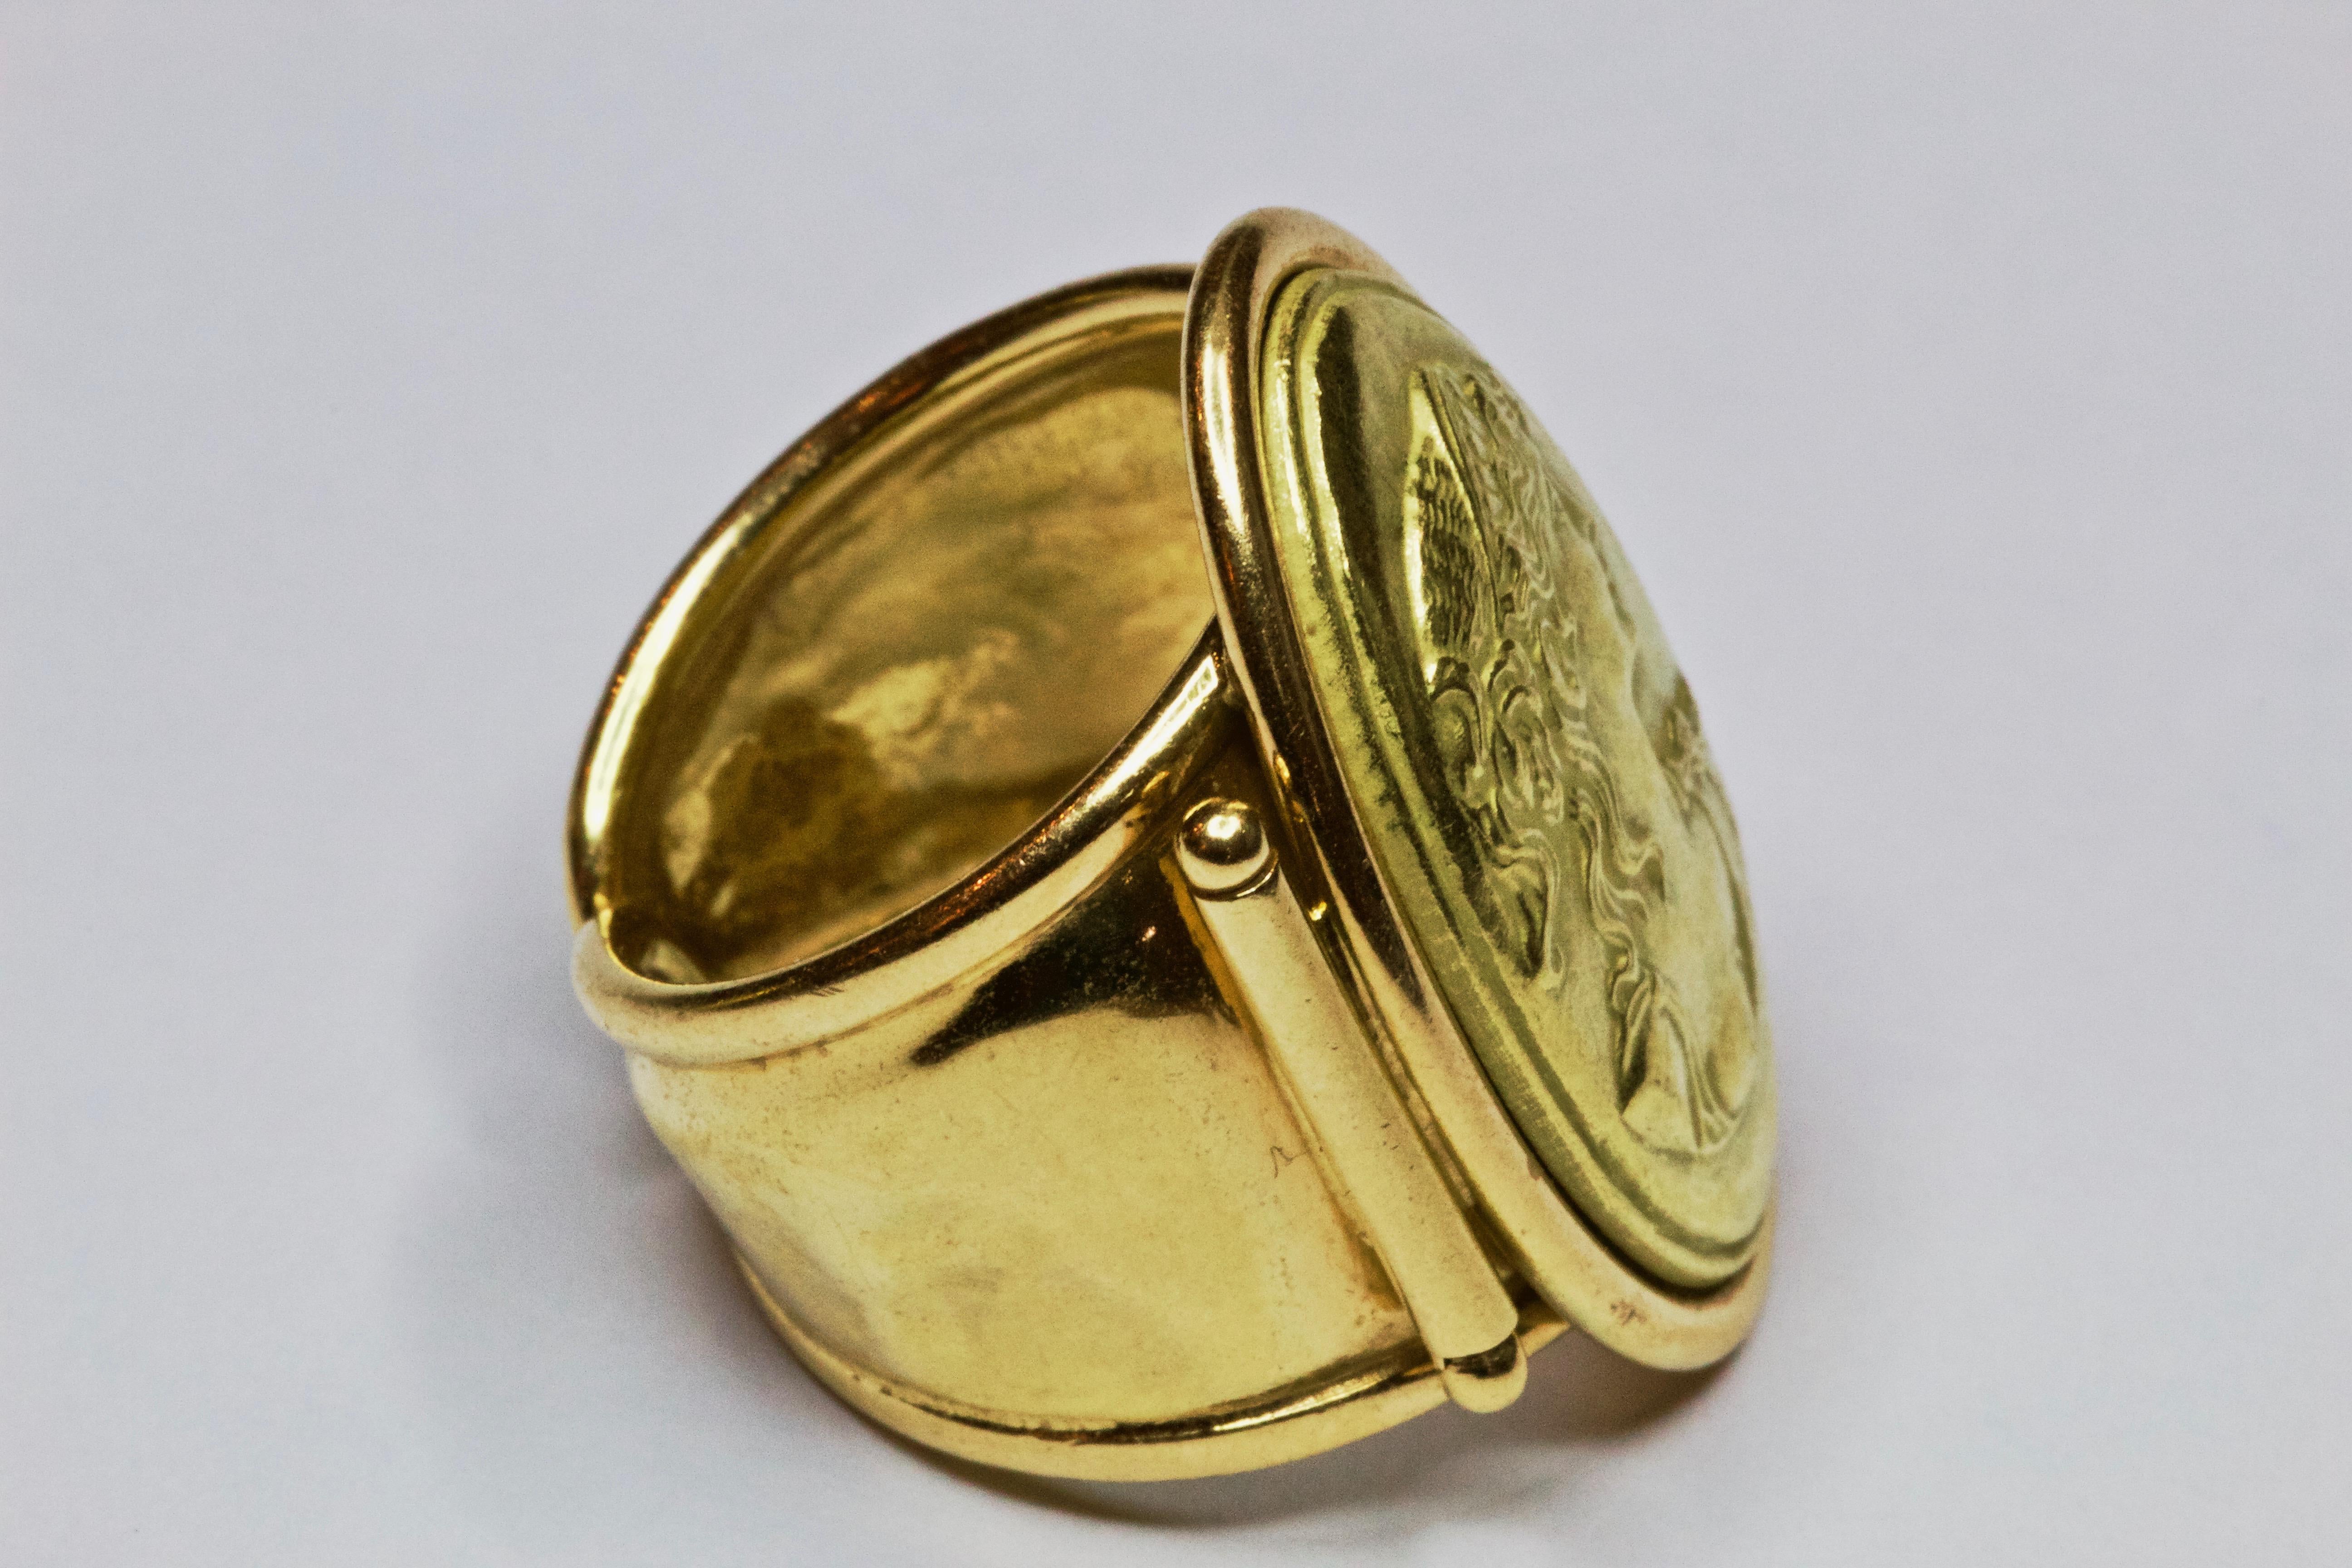 A fabulous example of an embossed portrait ring. beautifully modelled in a rich 18 carat yellow gold. makers mark 'AR'
Head: 25.89mm x 19.31mm 
Band Width: 13.42mm
Ring Size: L1/2 or 6  